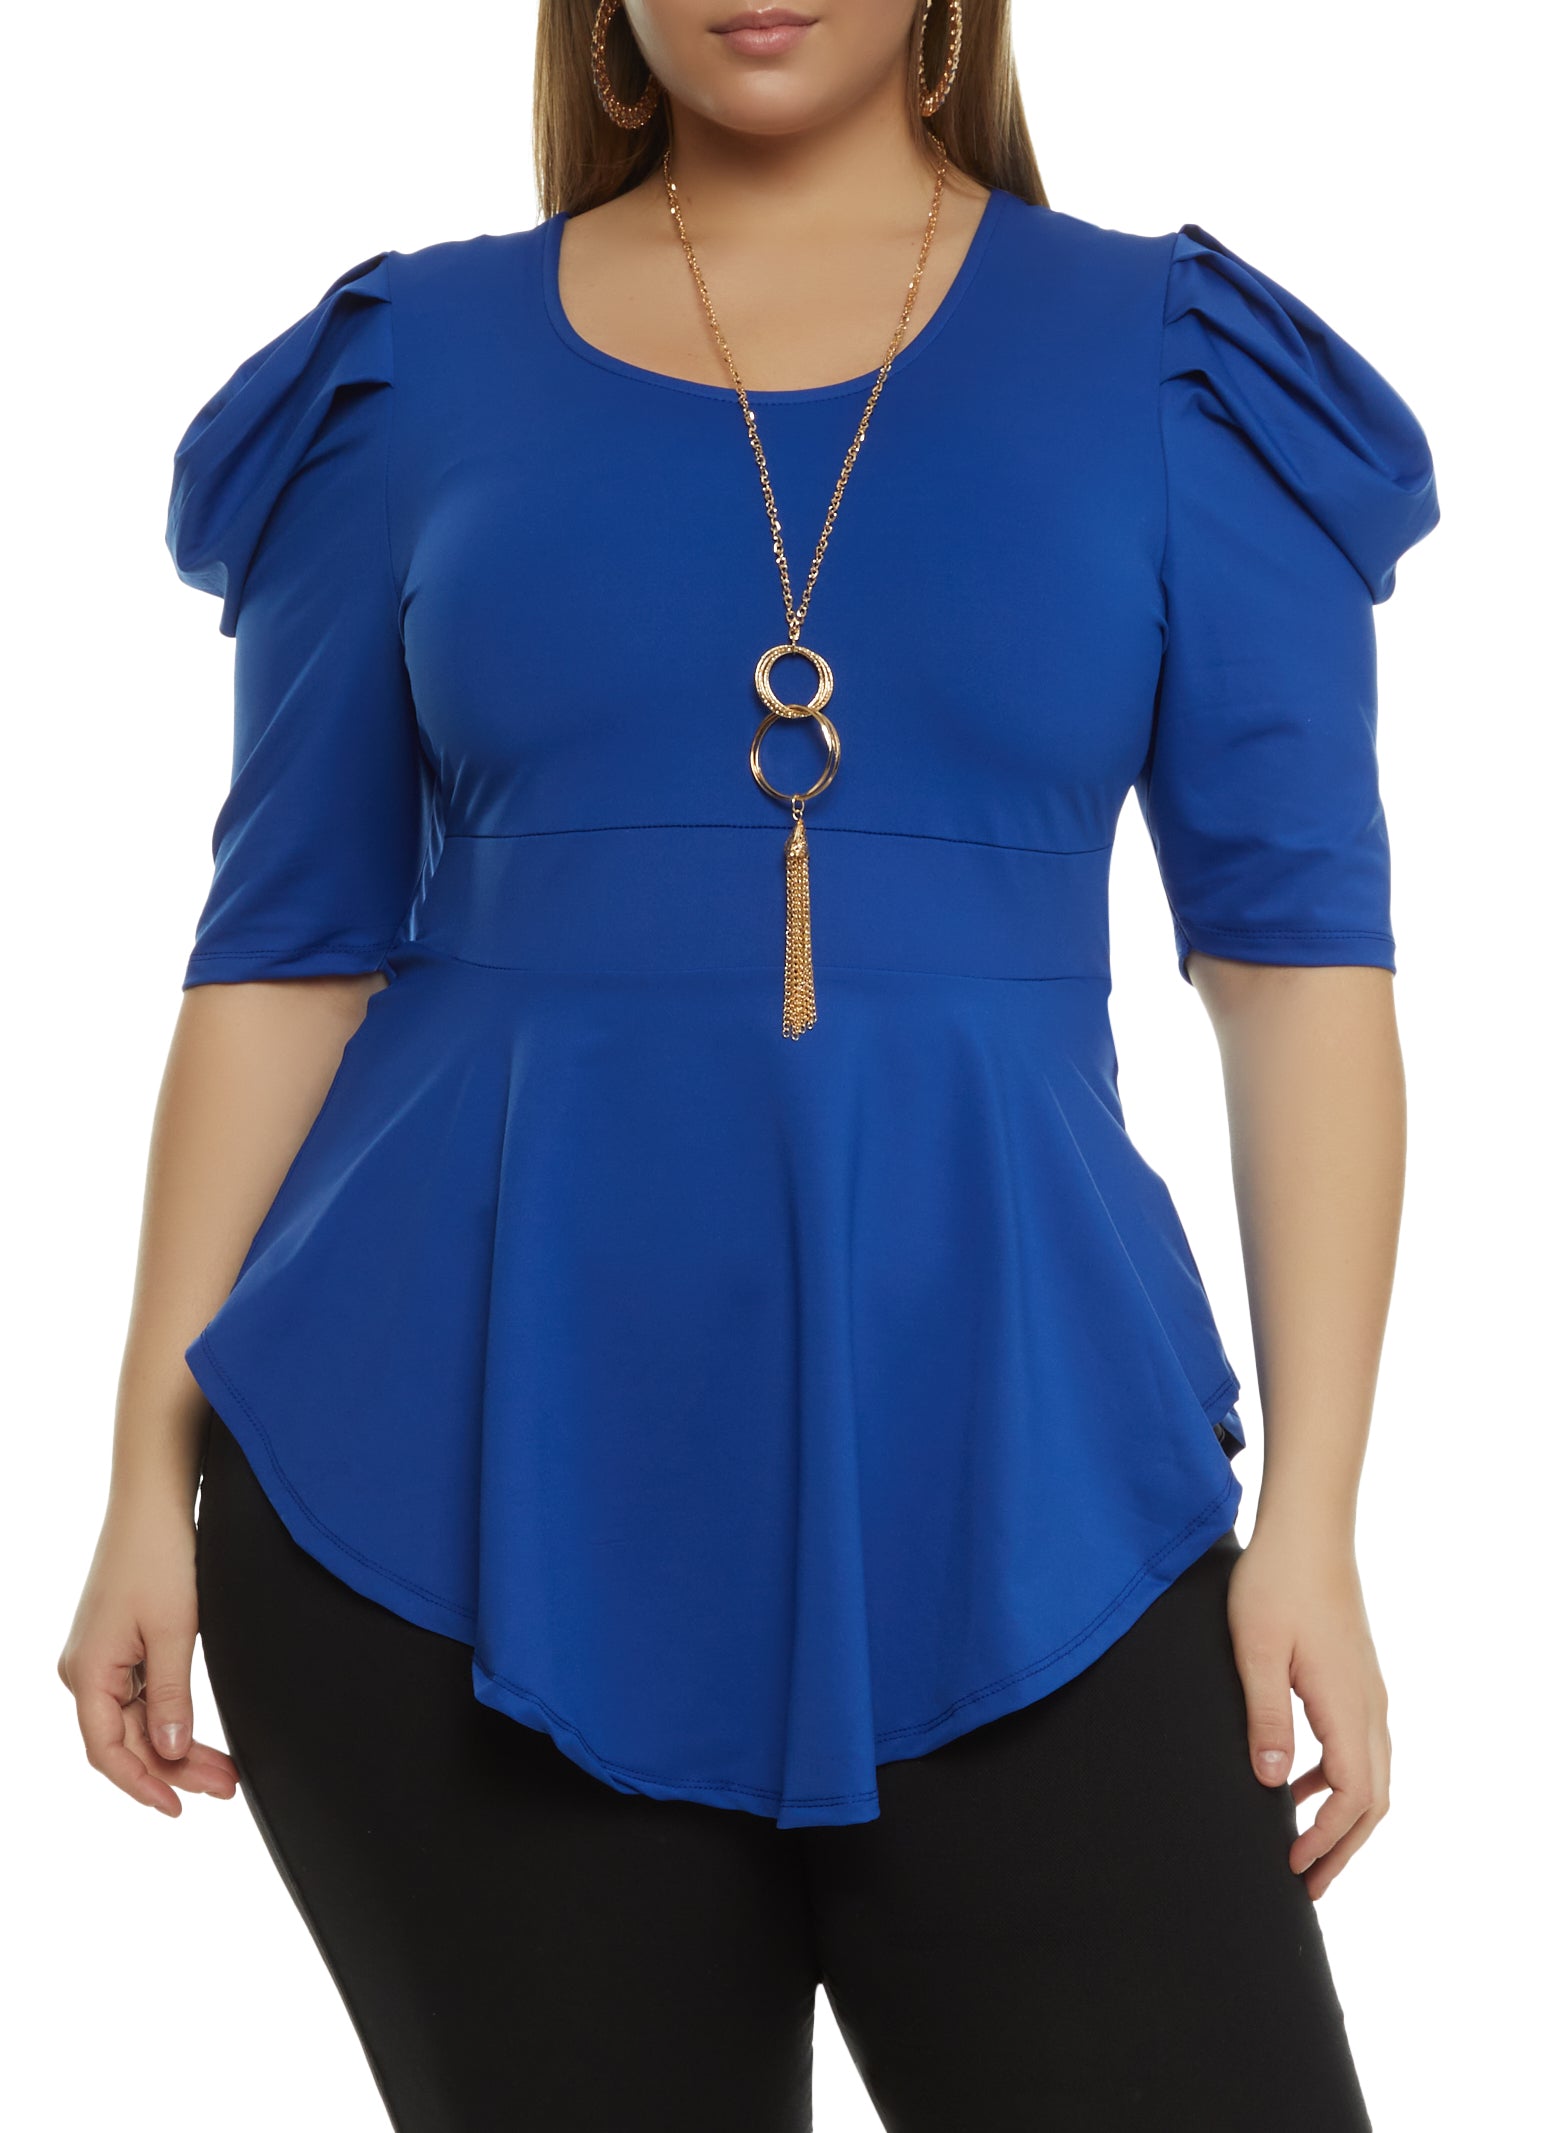 Plus Size Puff Sleeve Peplum Top with Necklace - Royal Blue